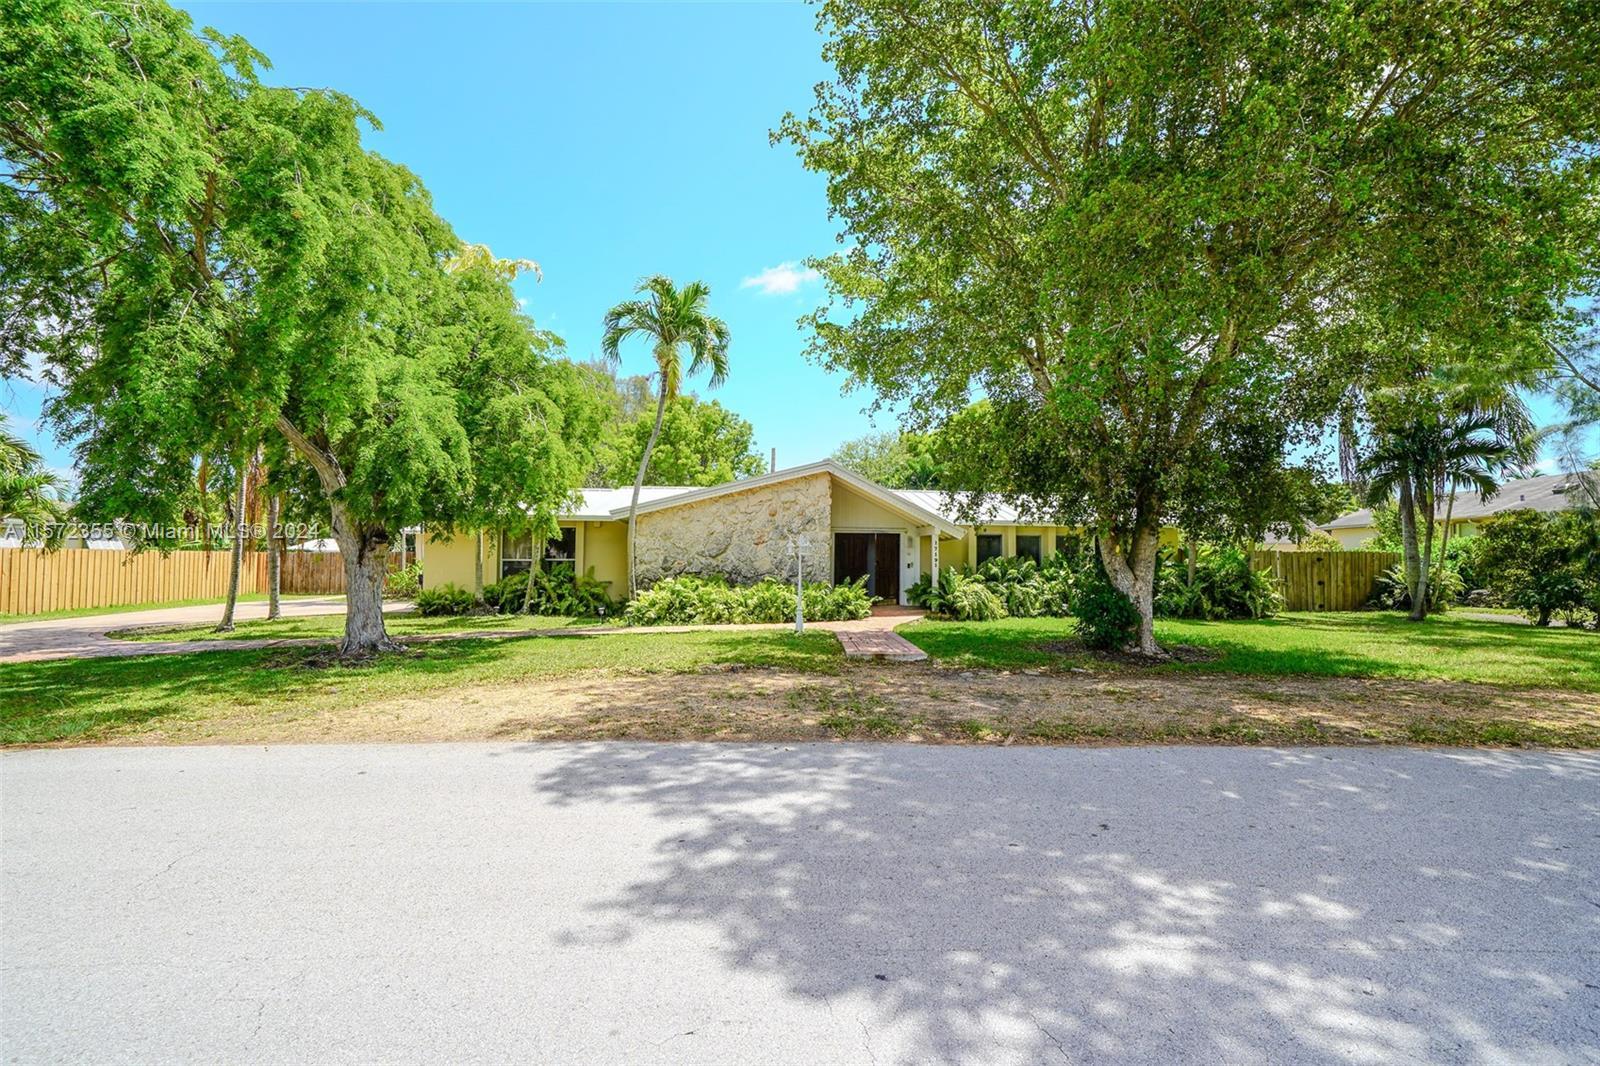 This Palmetto Bay 4 bedroom, 3 bathroom home with a 1 bedroom 1 bathroom, 2004-built guest house, po